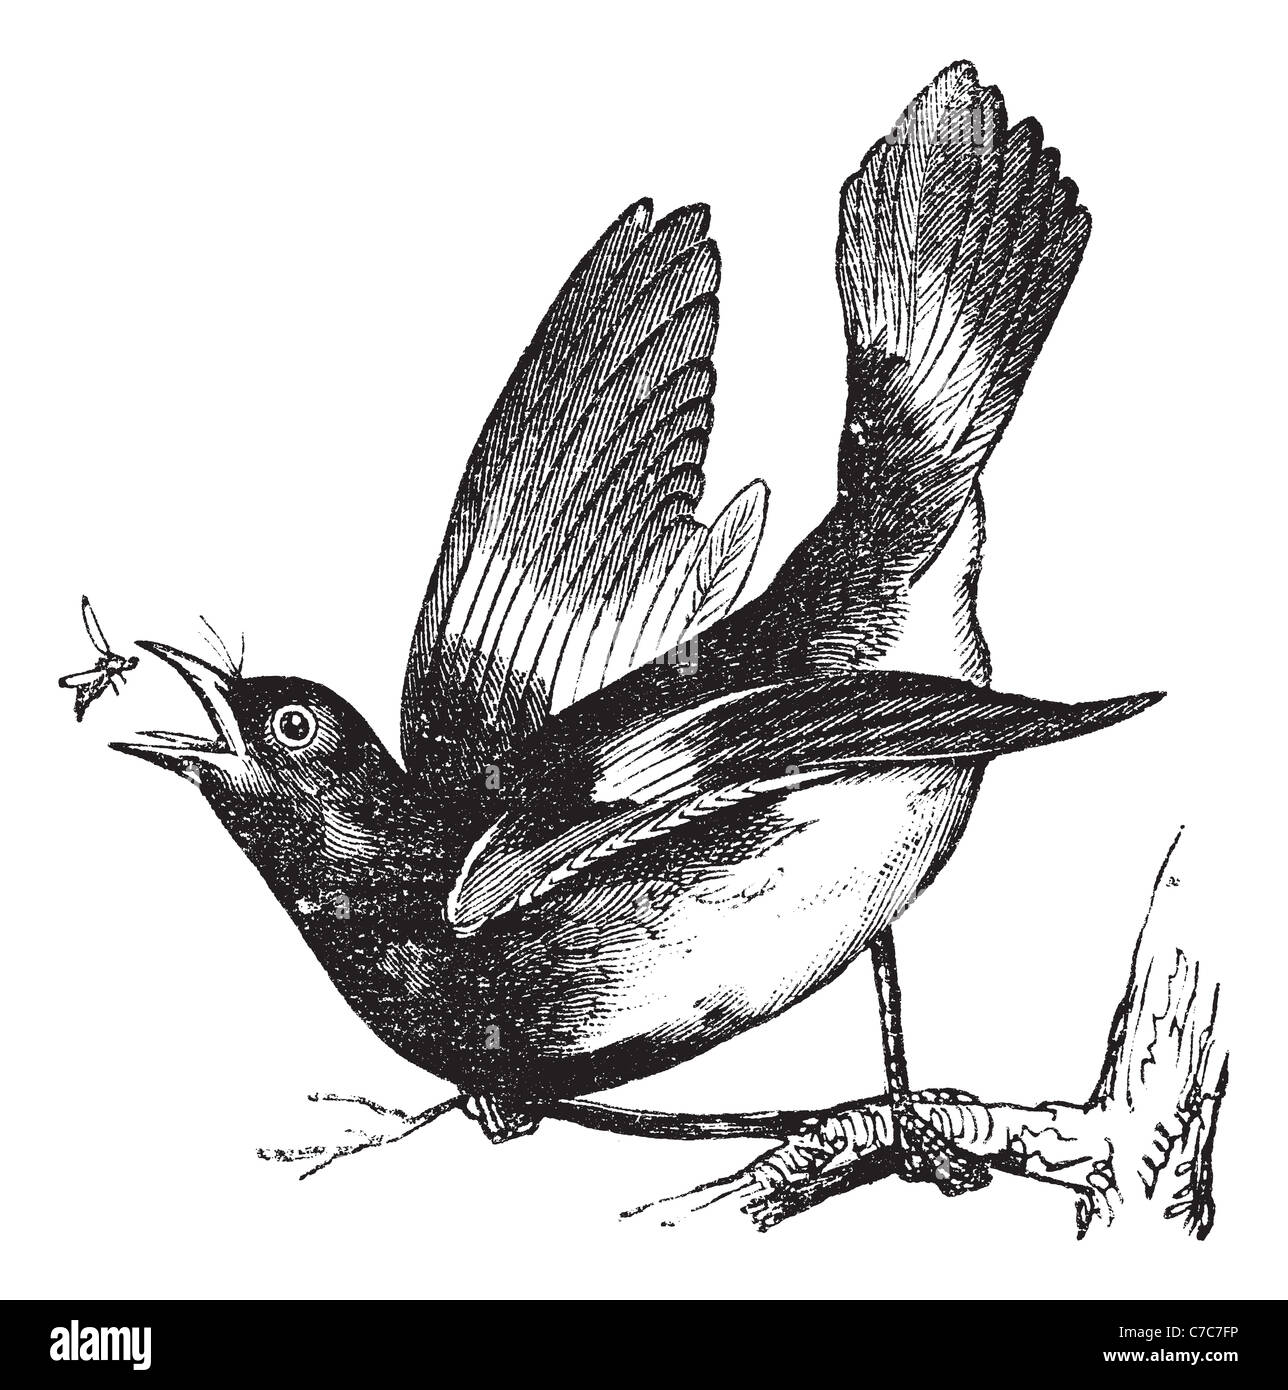 American Redstart, vintage engraving. Old engraved illustration of American Redstart catching an insect from the branch. Stock Photo